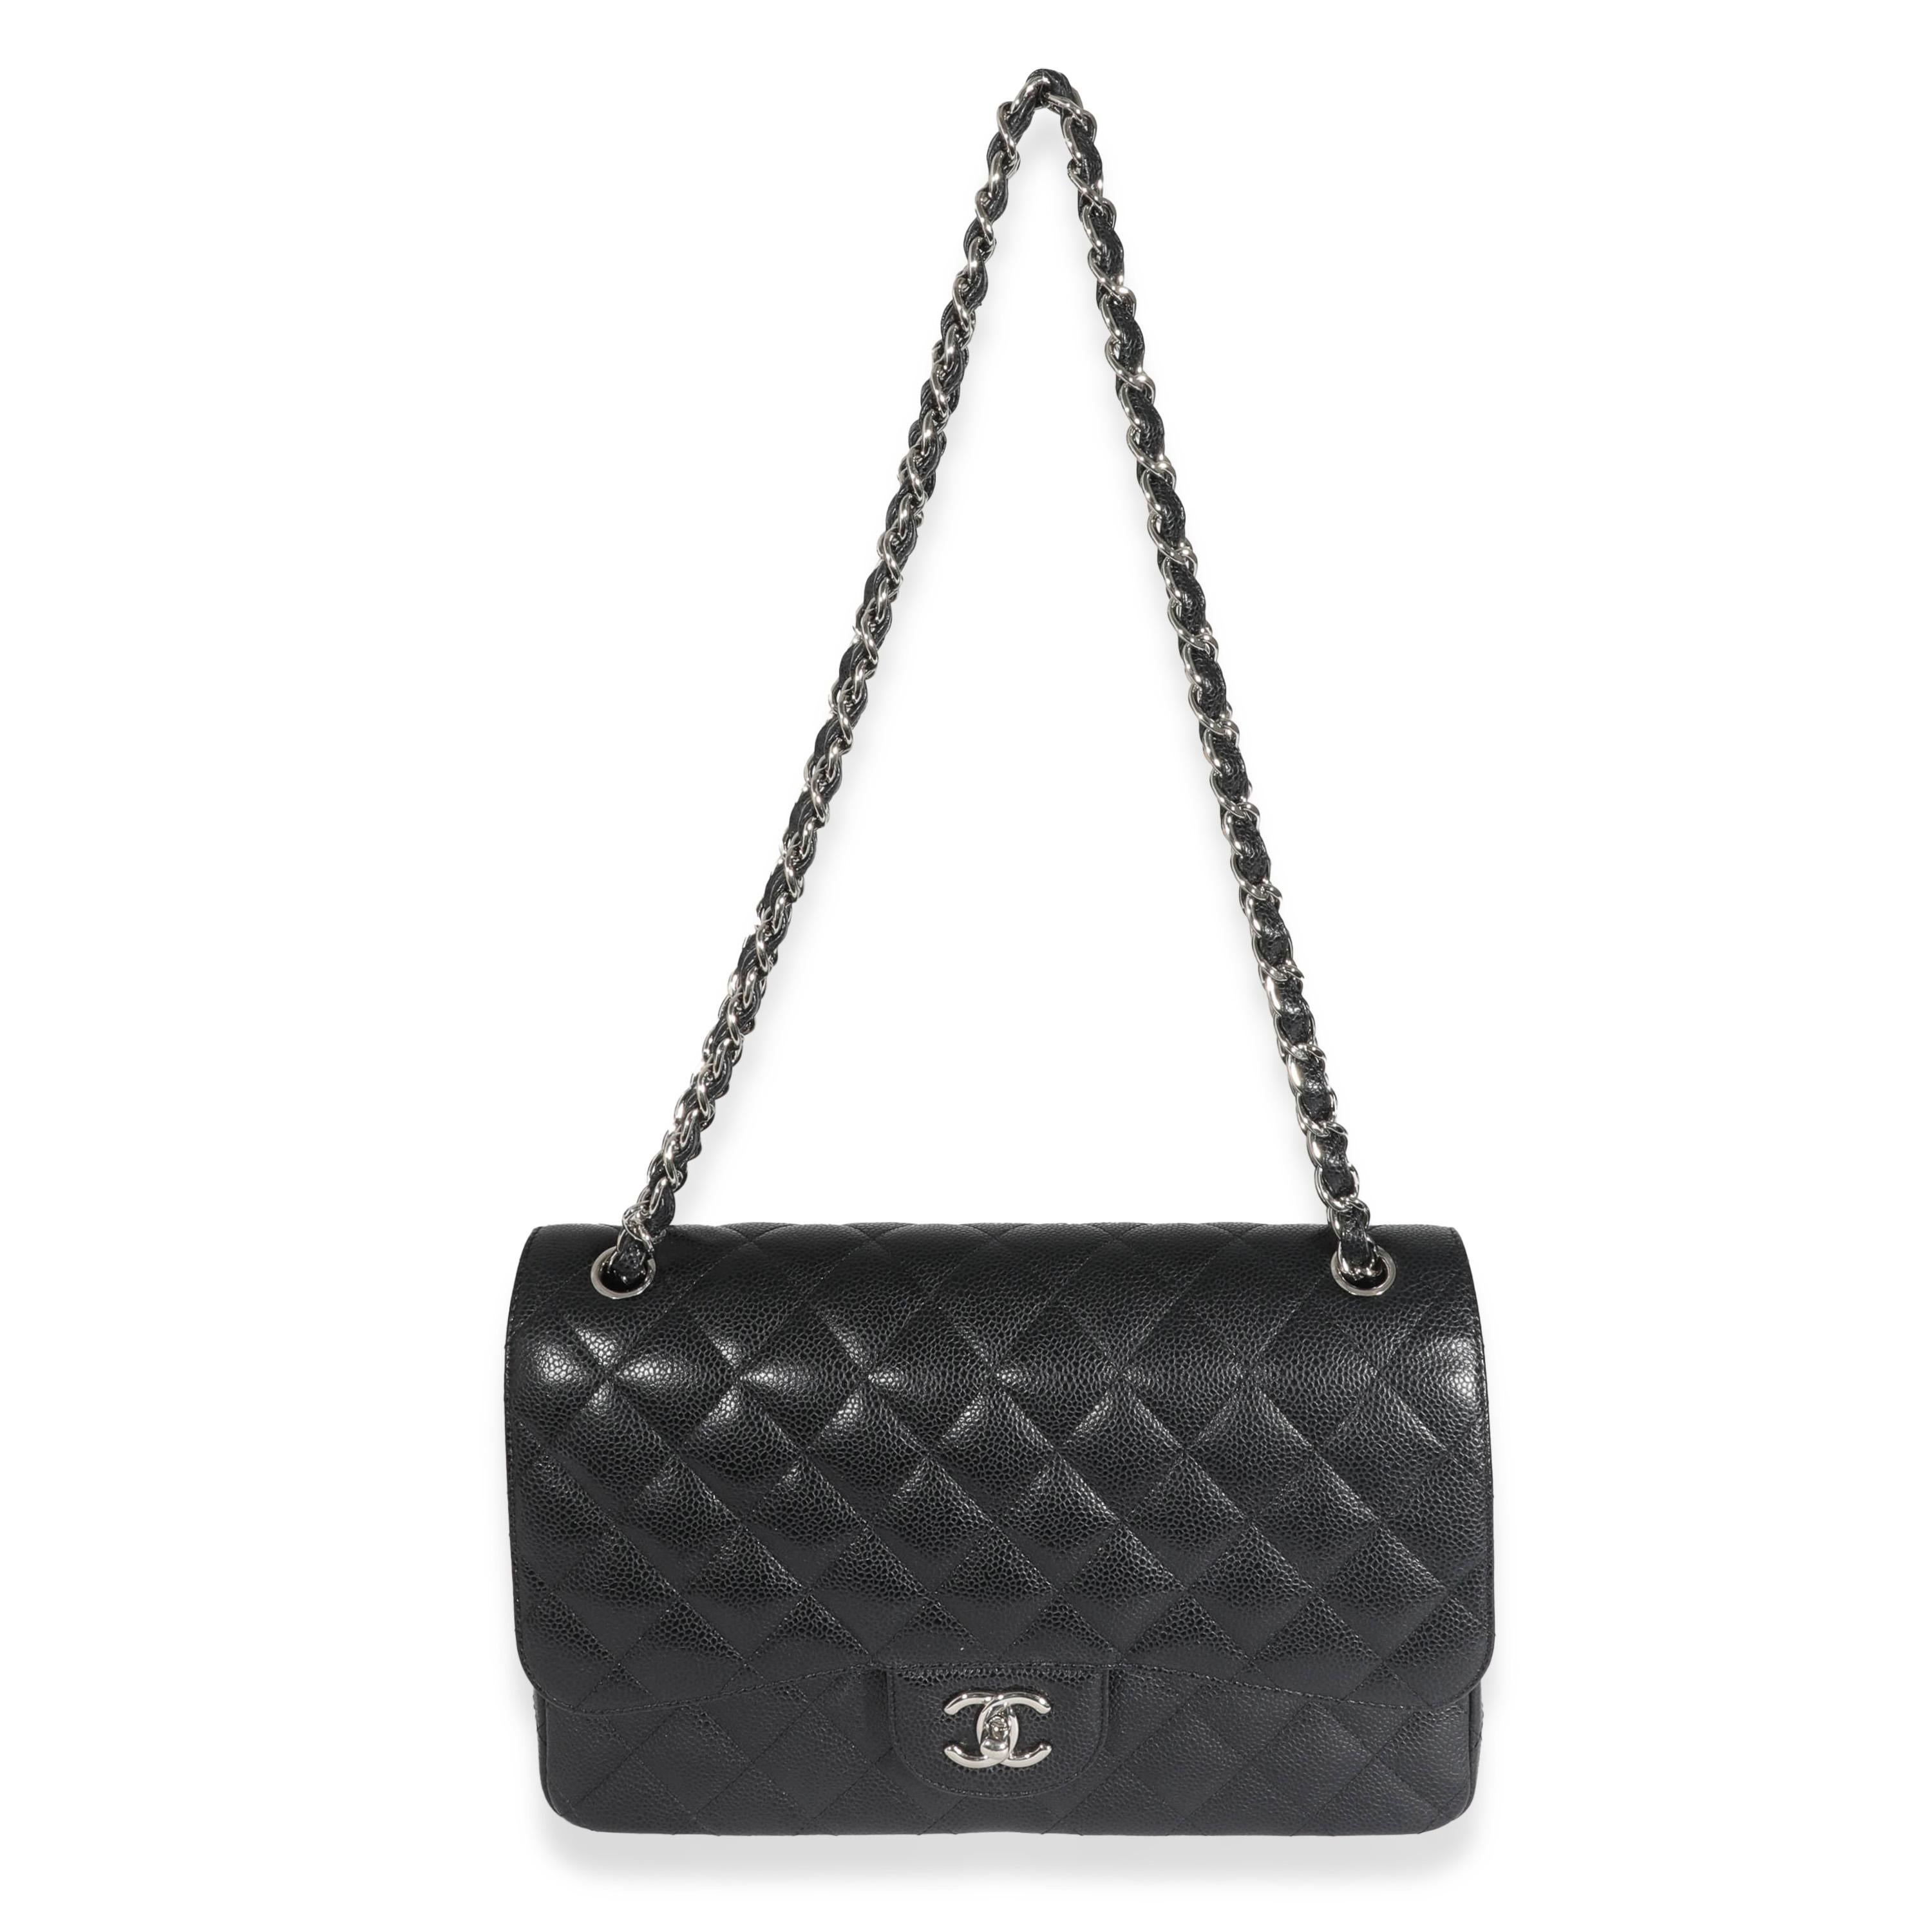 Listing Title: Chanel Black Caviar Jumbo Classic Double Flap Bag
SKU: 131908
Condition: Pre-owned 
Condition Description: A timeless classic that never goes out of style, the flap bag from Chanel dates back to 1955 and has seen a number of updates.